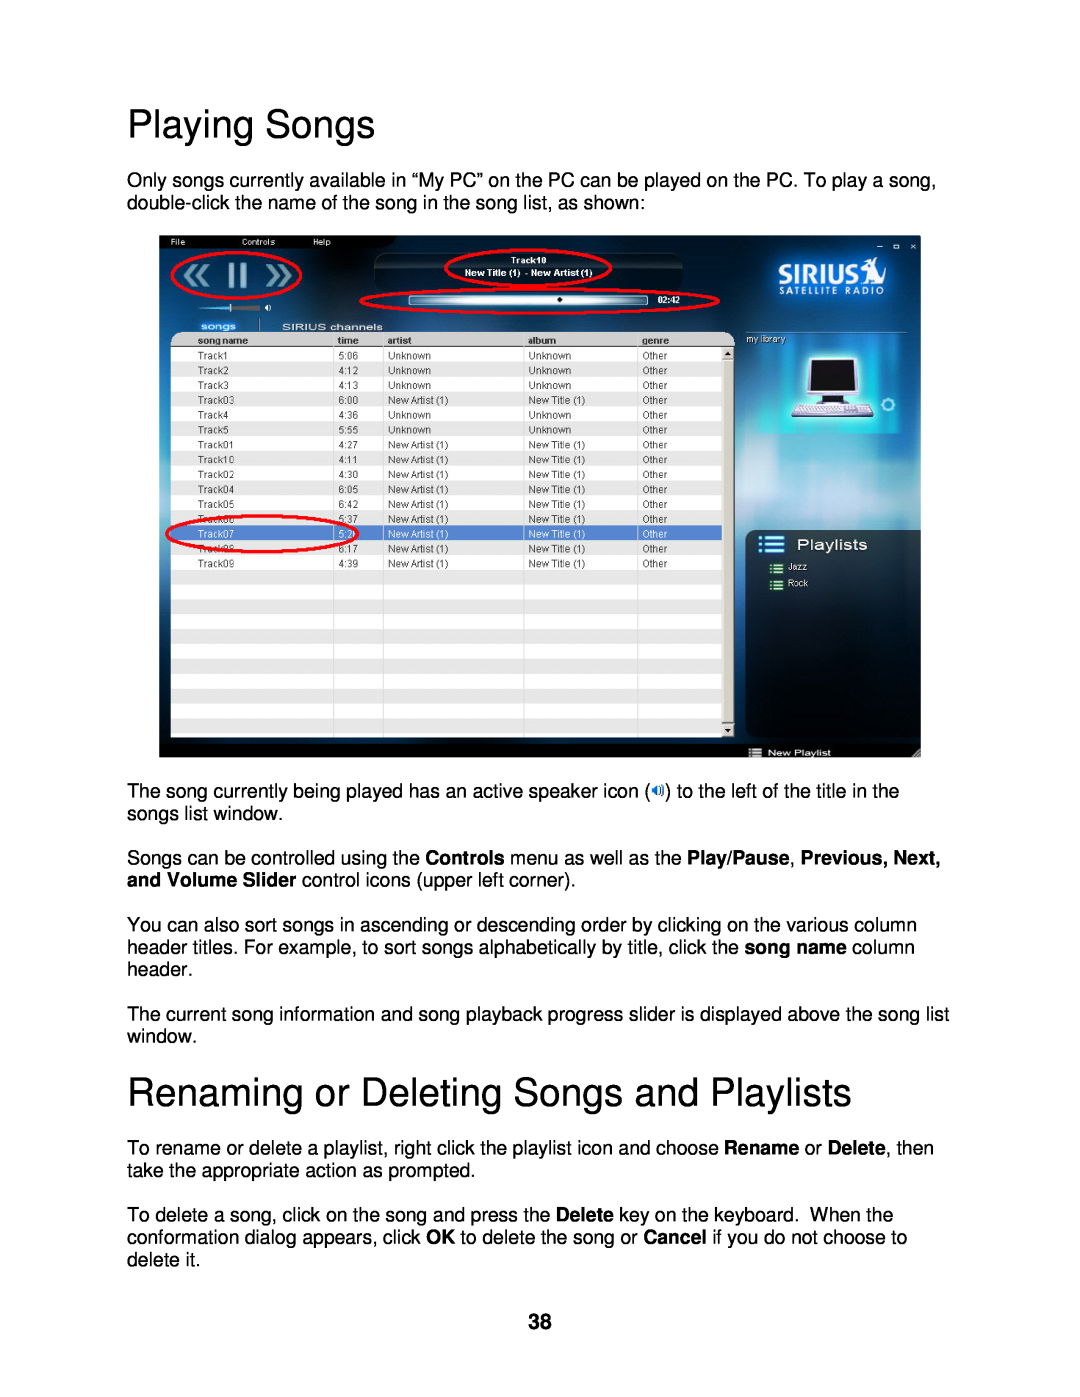 Sirius Satellite Radio 100 manual Playing Songs, Renaming or Deleting Songs and Playlists 